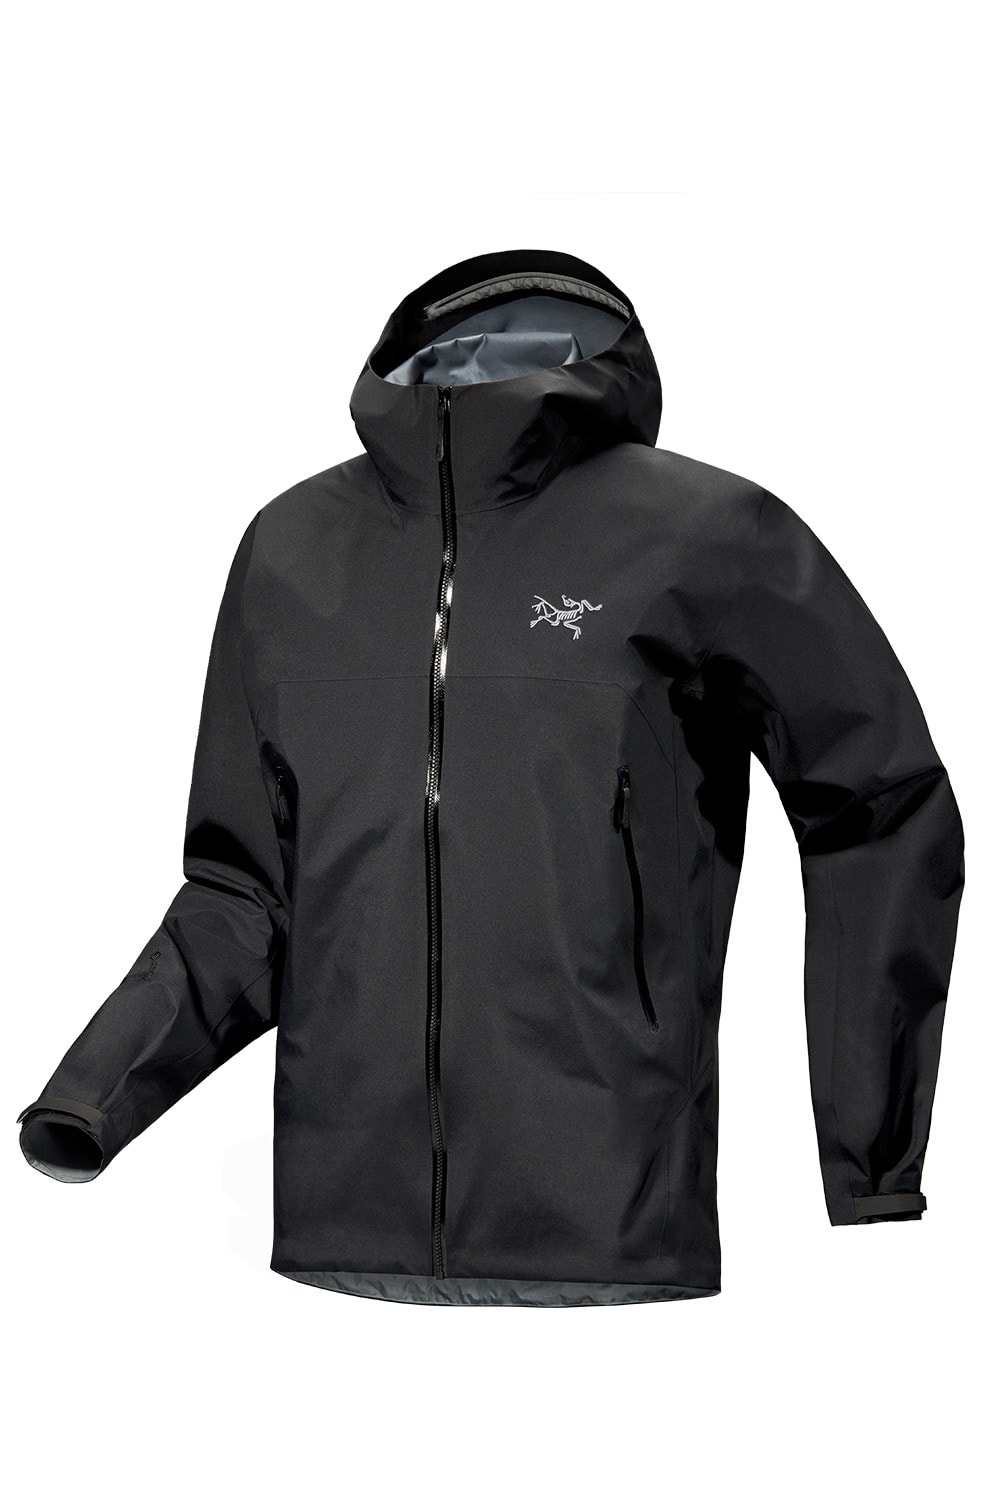 Arc'teryx Launches Sustainable ePA Beta Jacket Featuring a Brand New Version of GORE-TEX